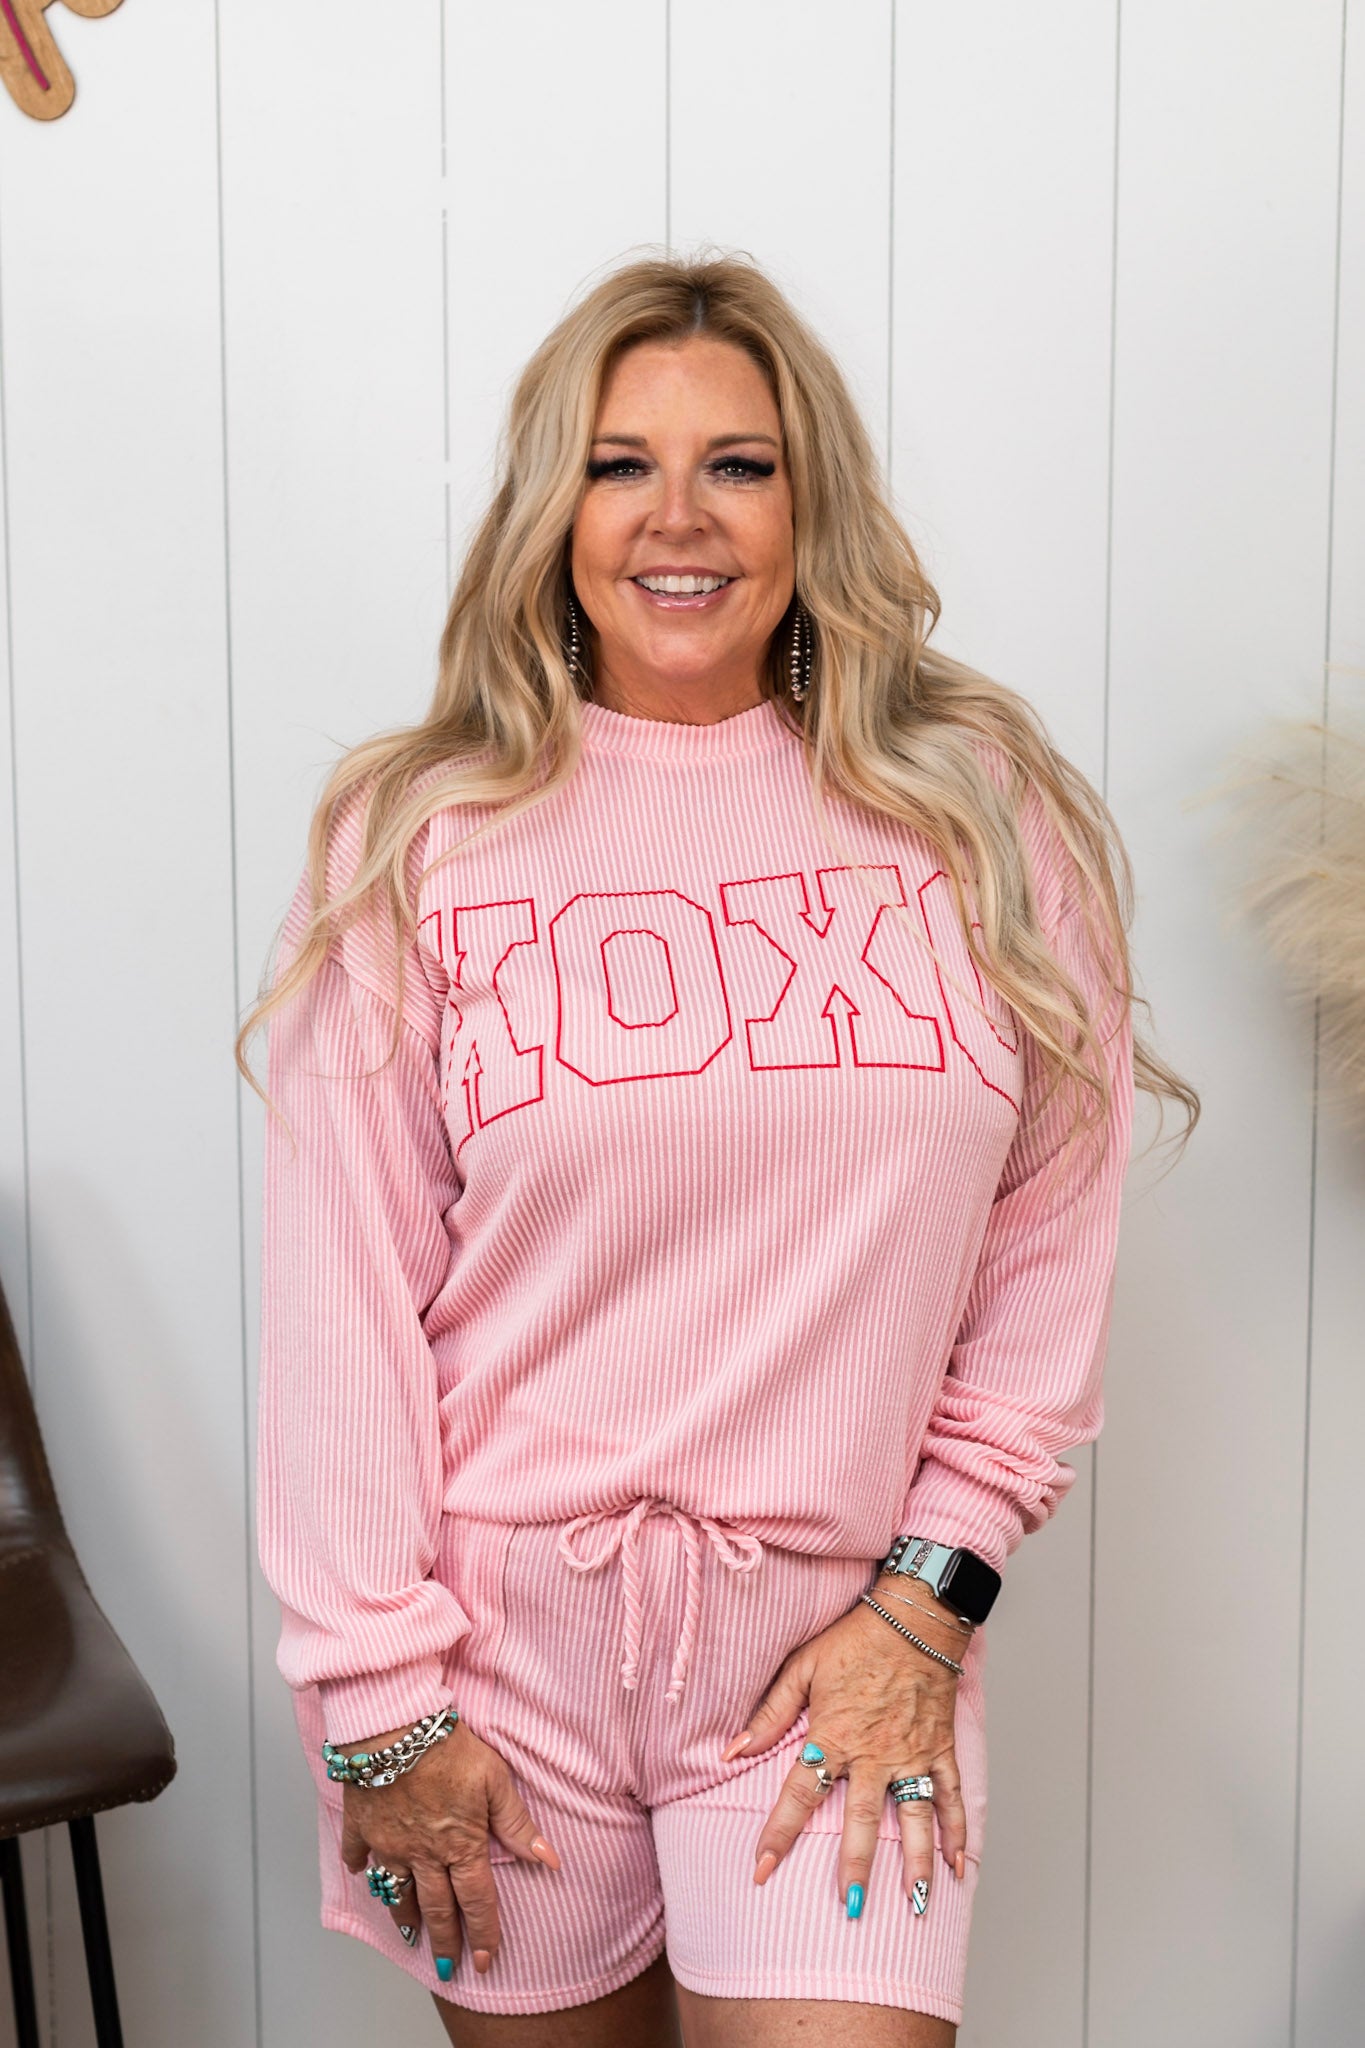 "XOXO" Pullover - LIGHT PINK